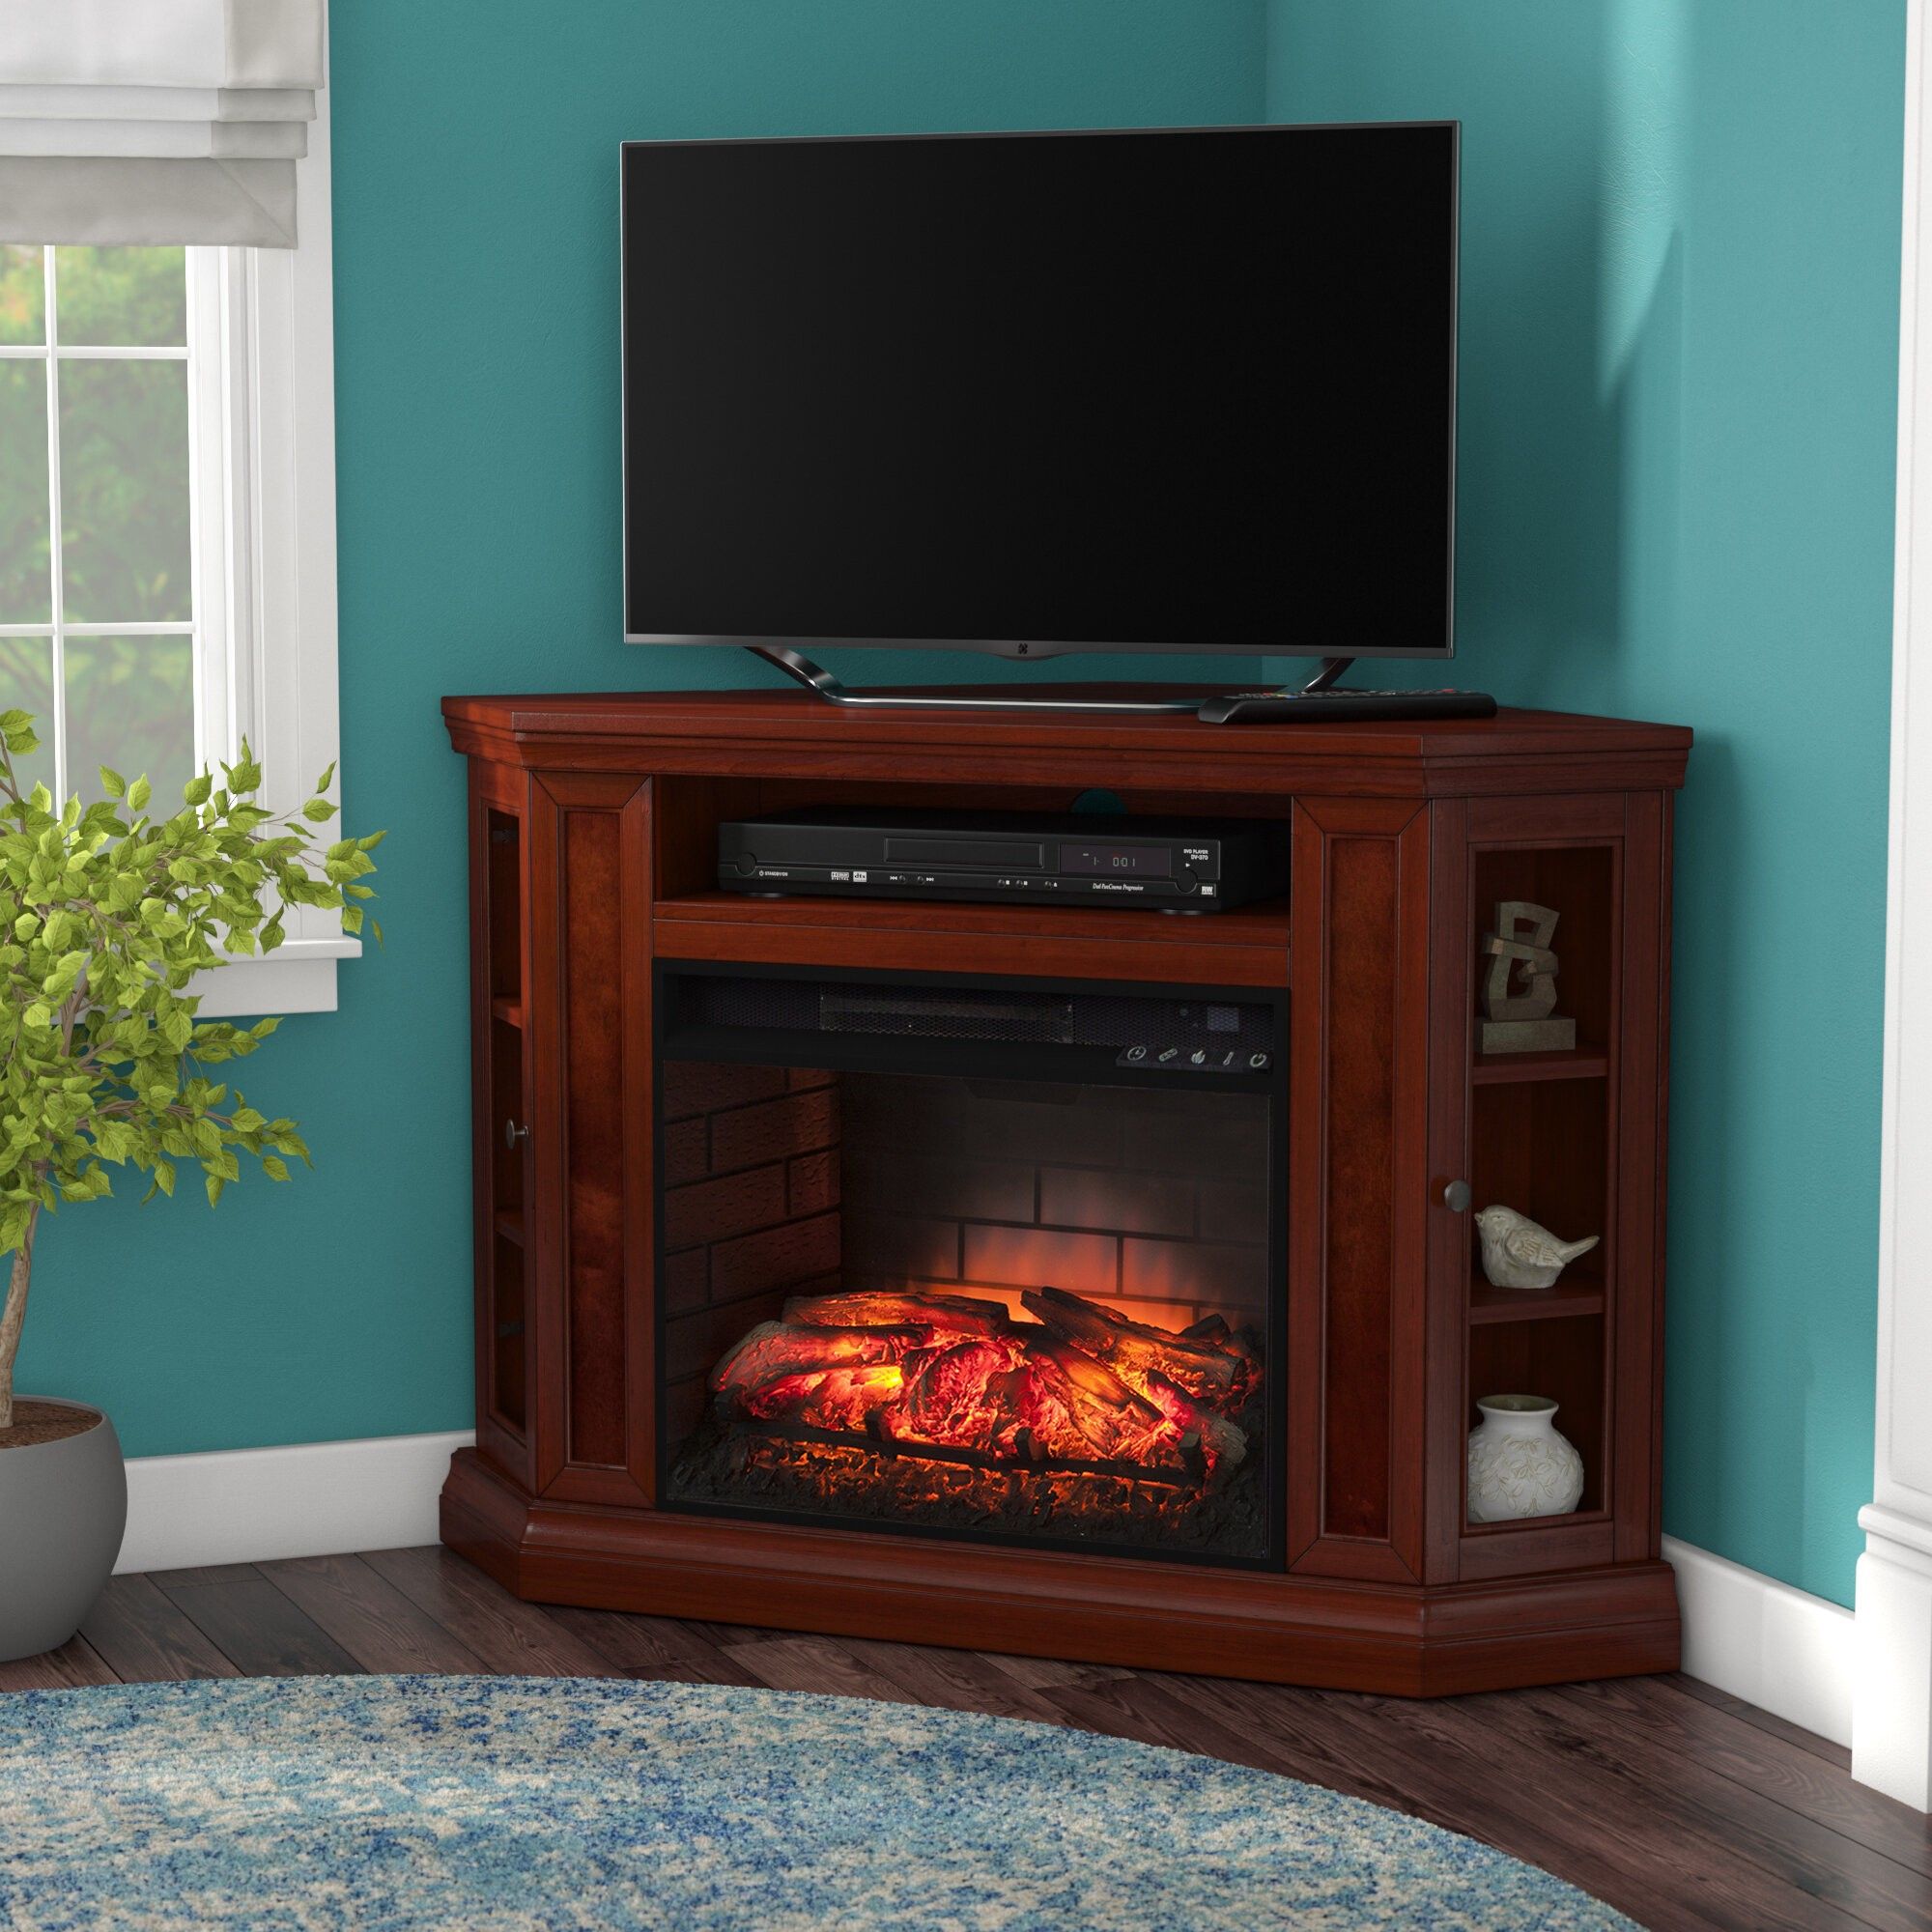 10 Best Corner Tv Stands For 2021 – Ideas On Foter In Tv Stands For Corners (View 14 of 15)